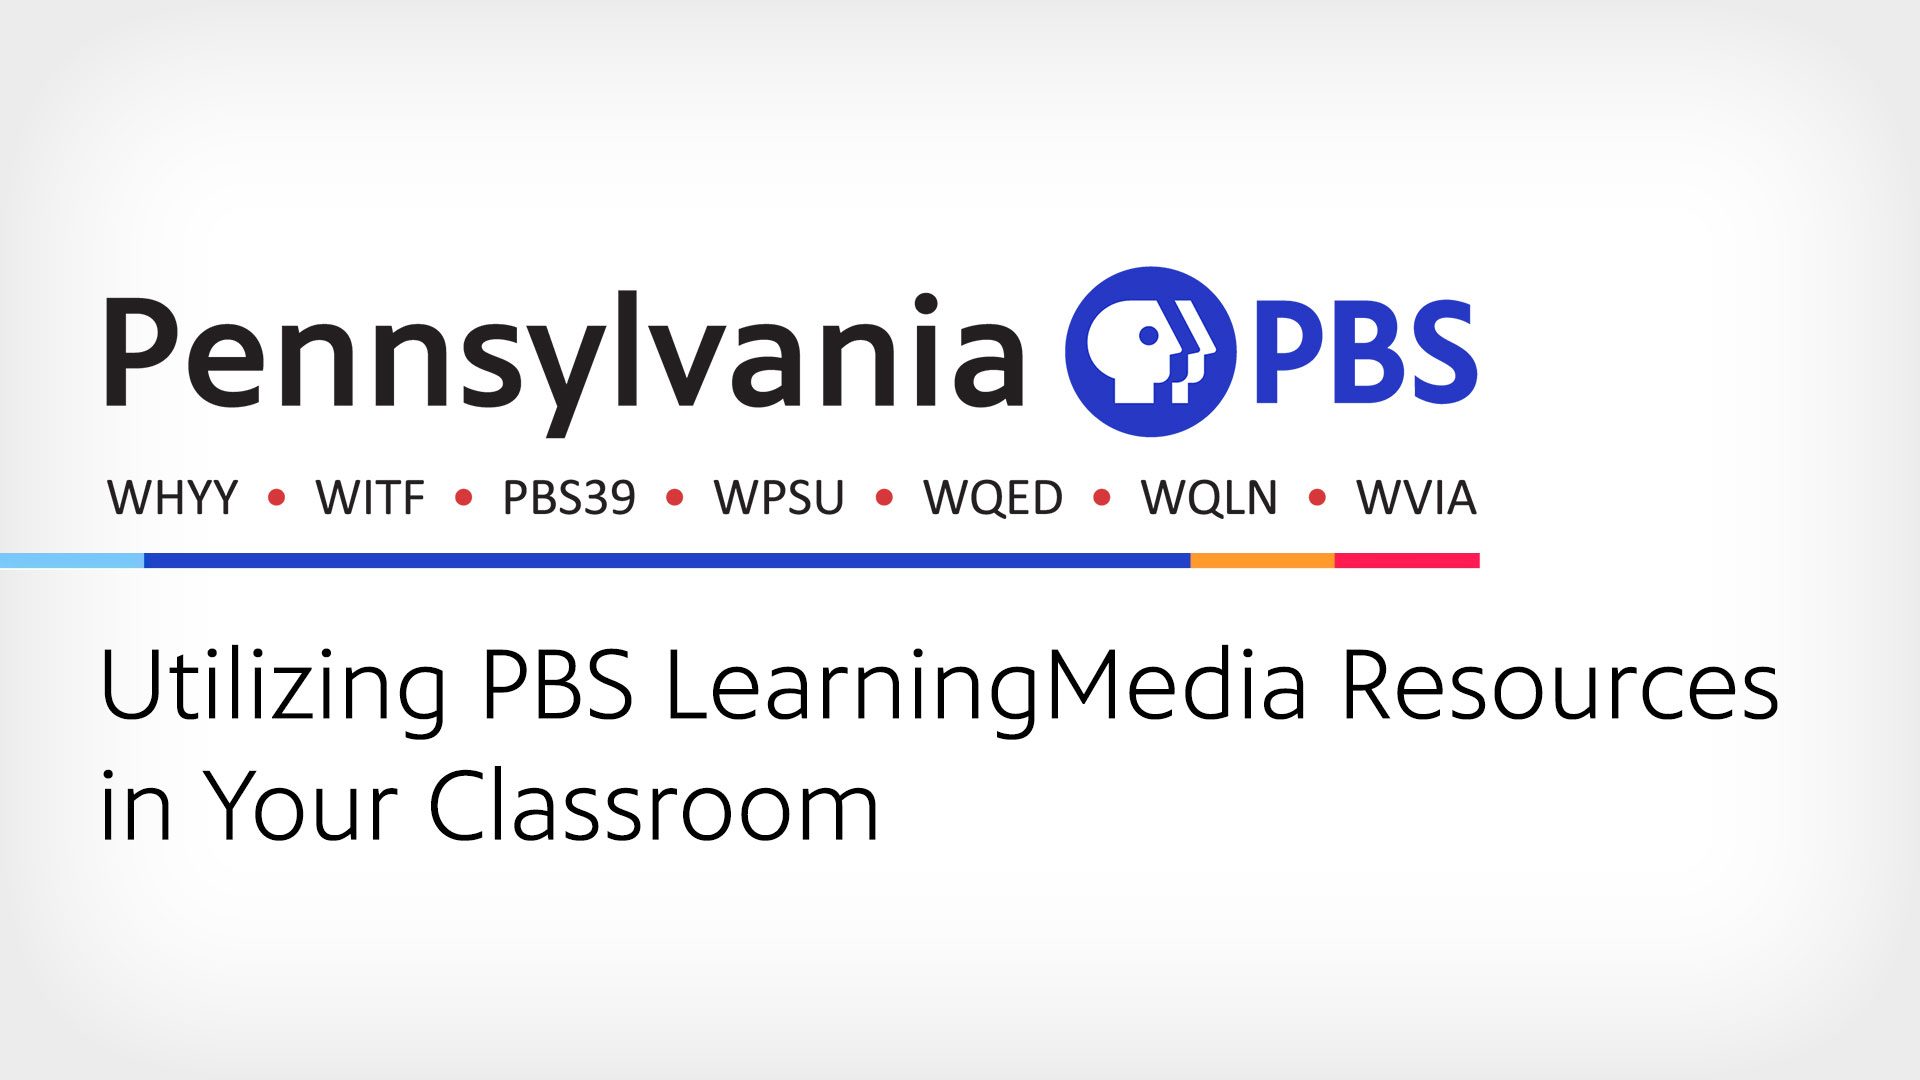 Utilizing PBS LearningMedia Resources in Your Classroom